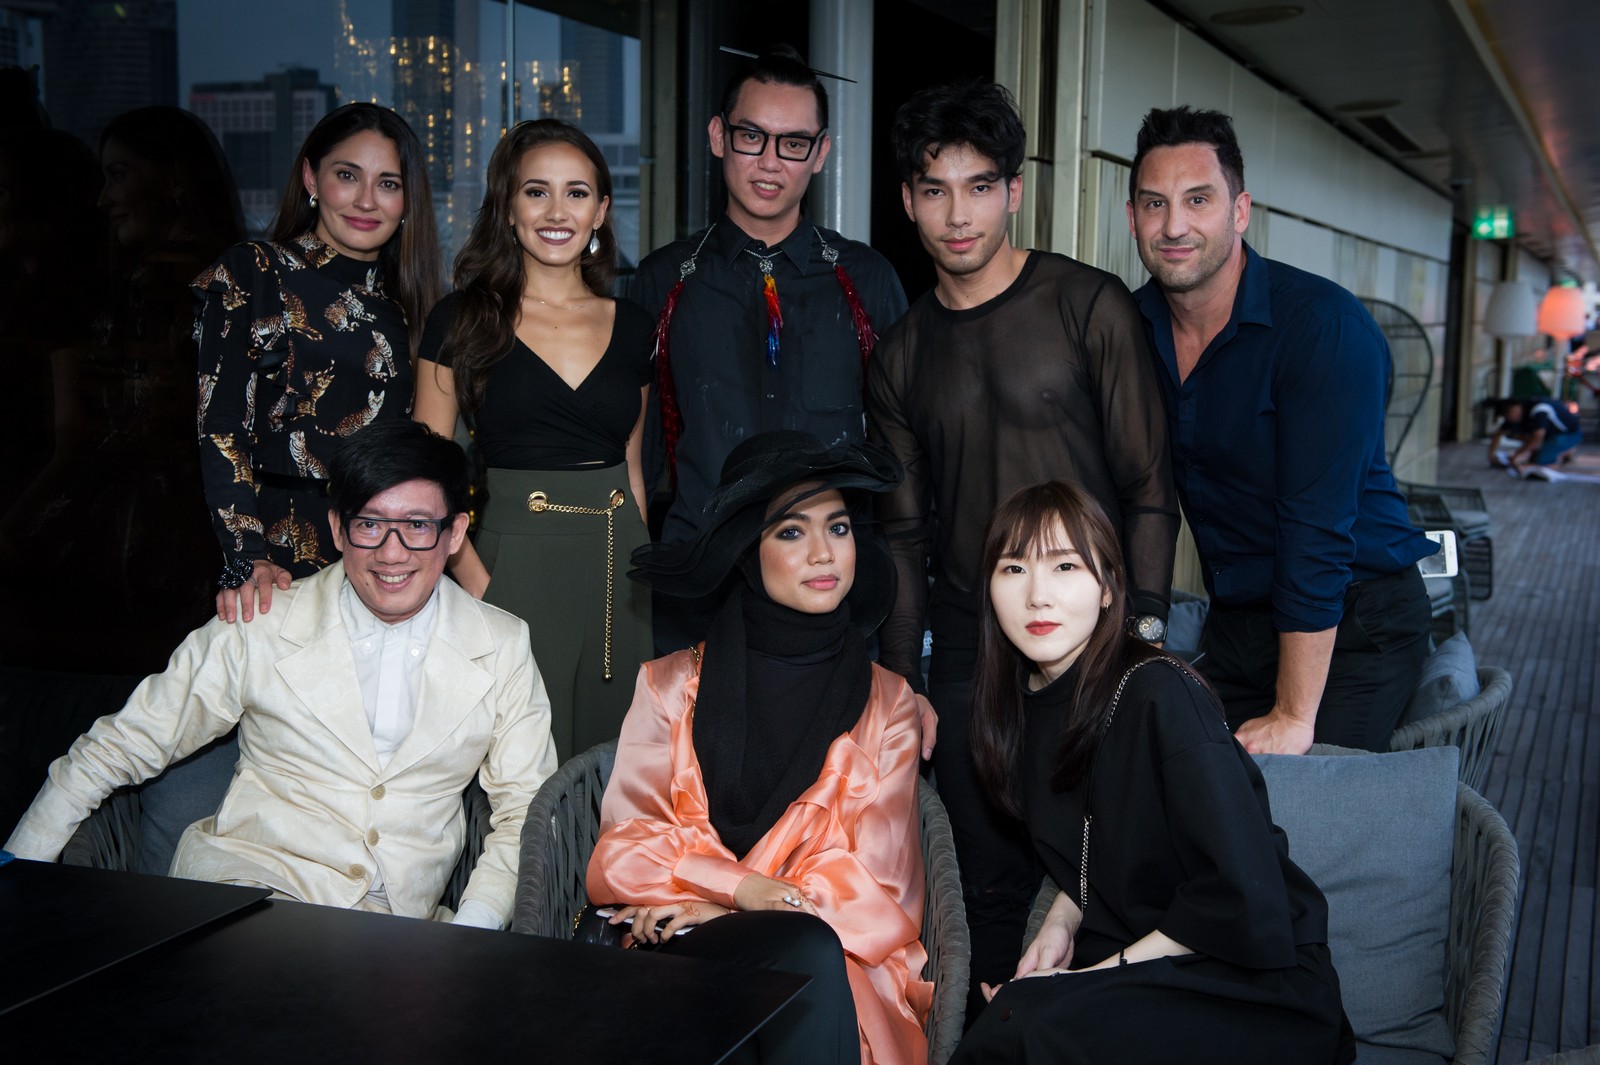 Looking trendy! Zalora holds VIP cocktail party for fashion industry ...